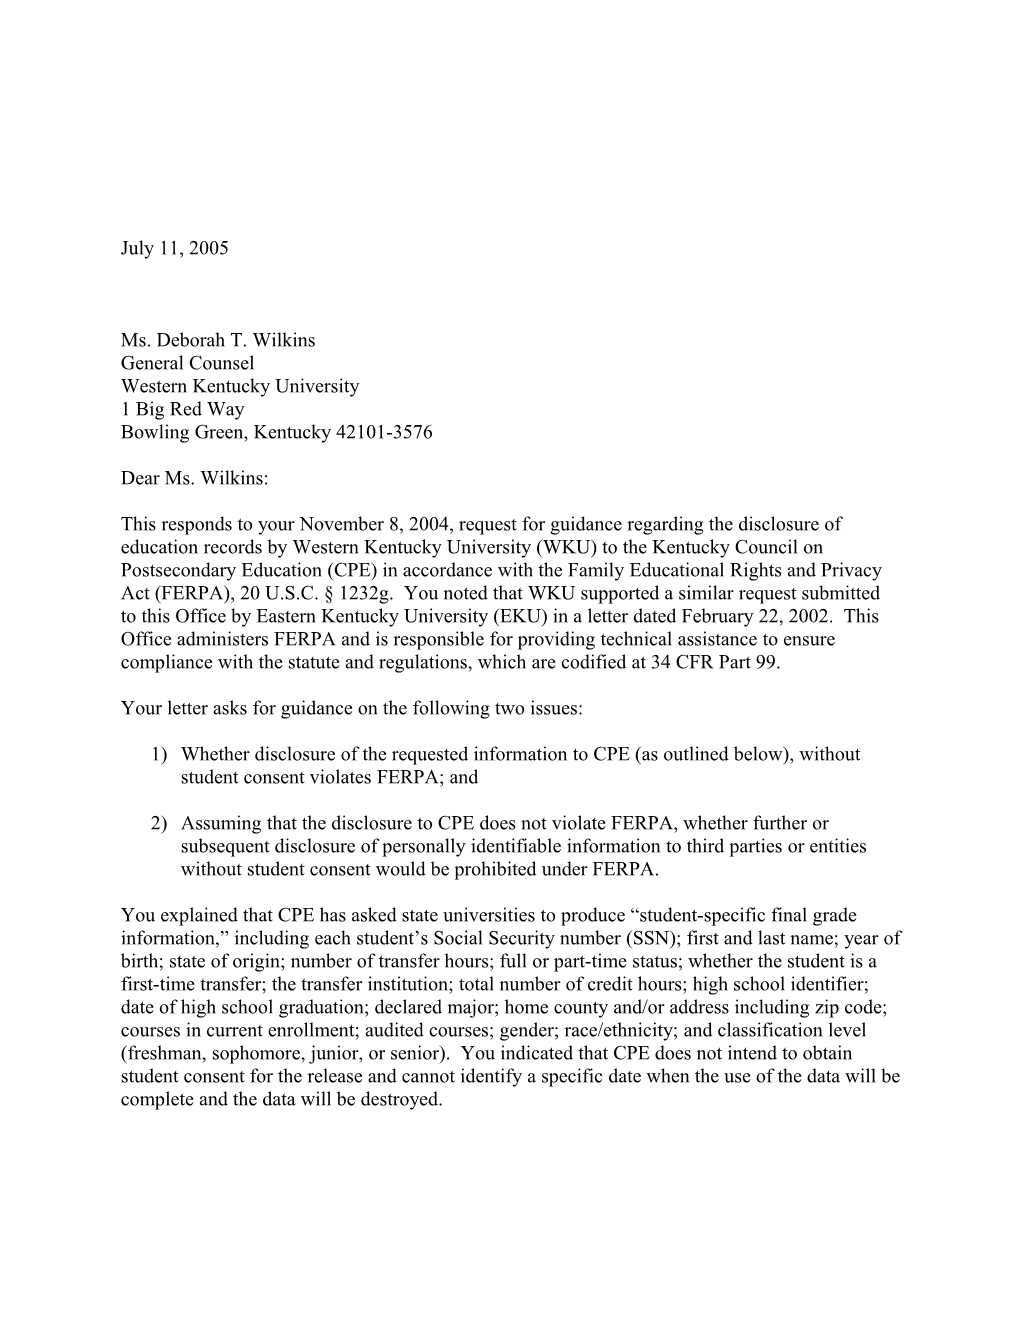 Letter to Western Kentucky University Re: Disclosure of Information to Statewide Database